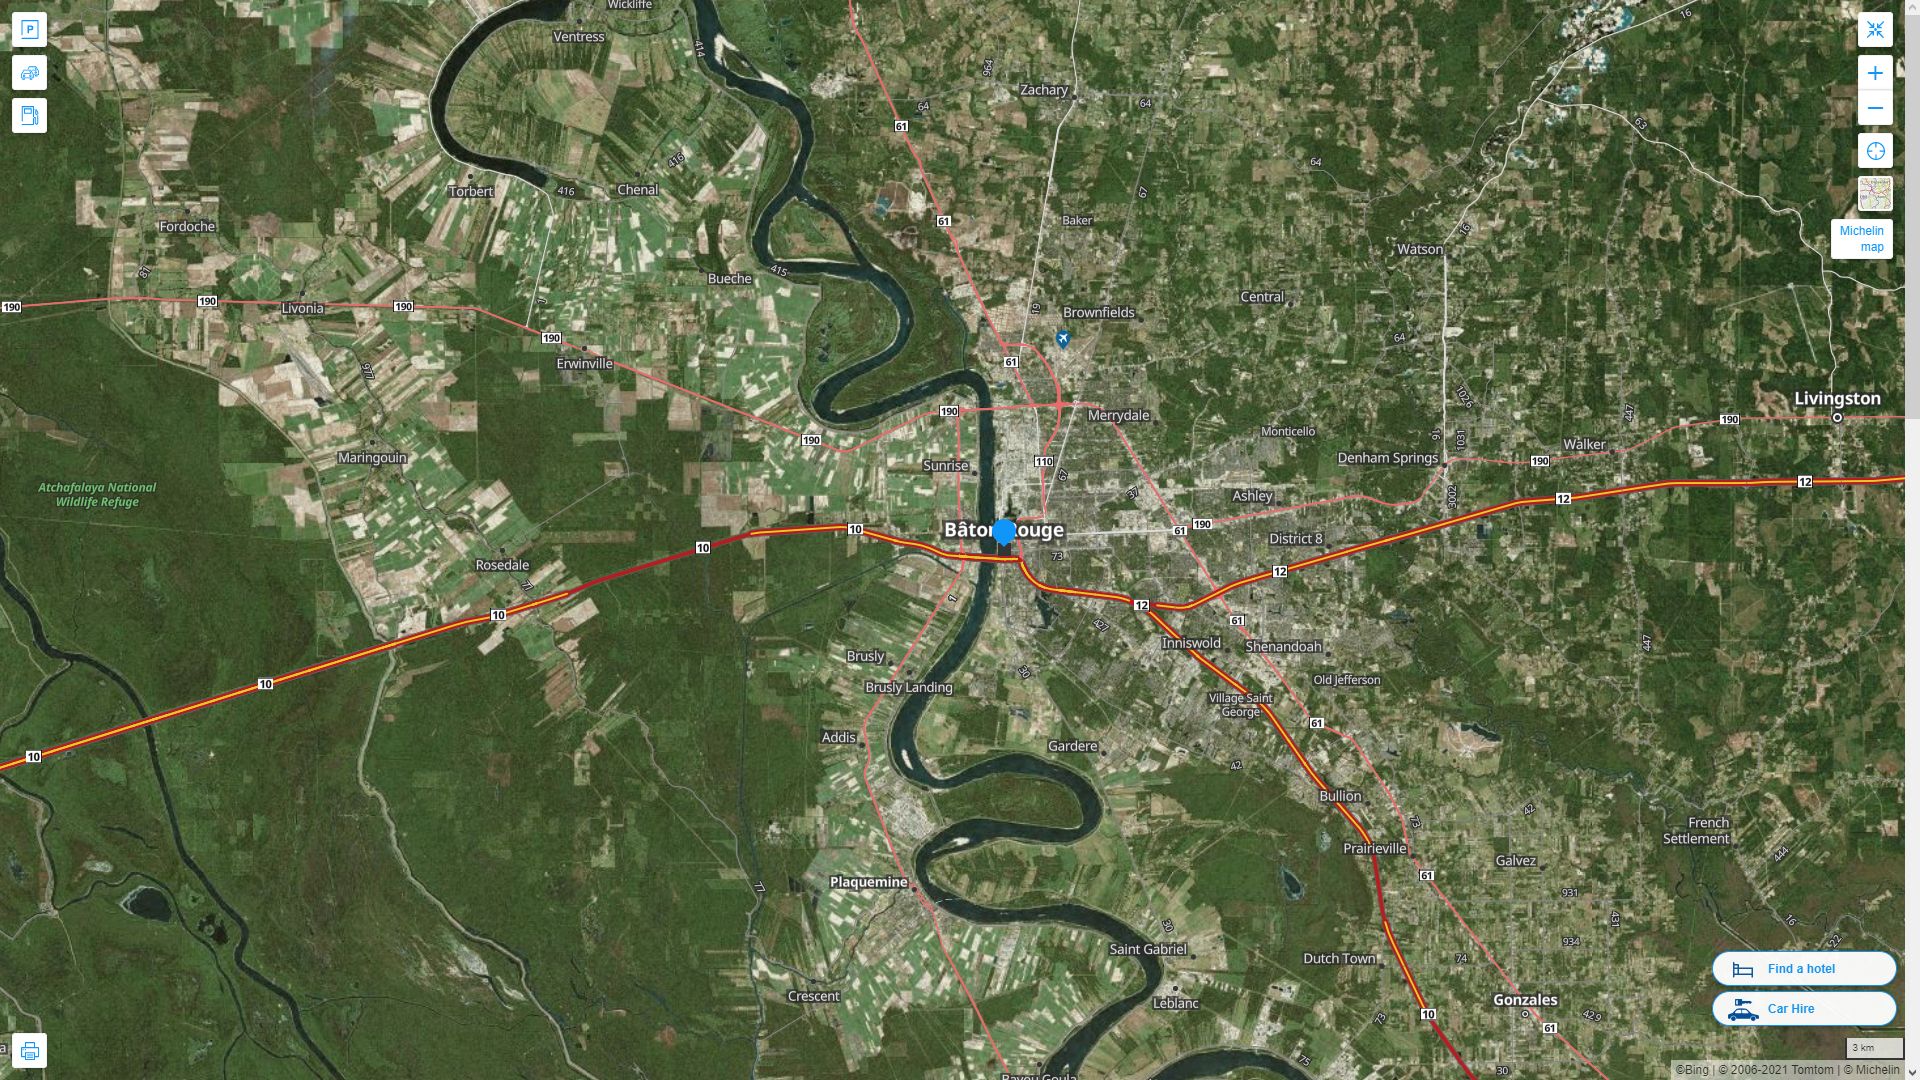 Baton Rouge Louisiana Highway and Road Map with Satellite View